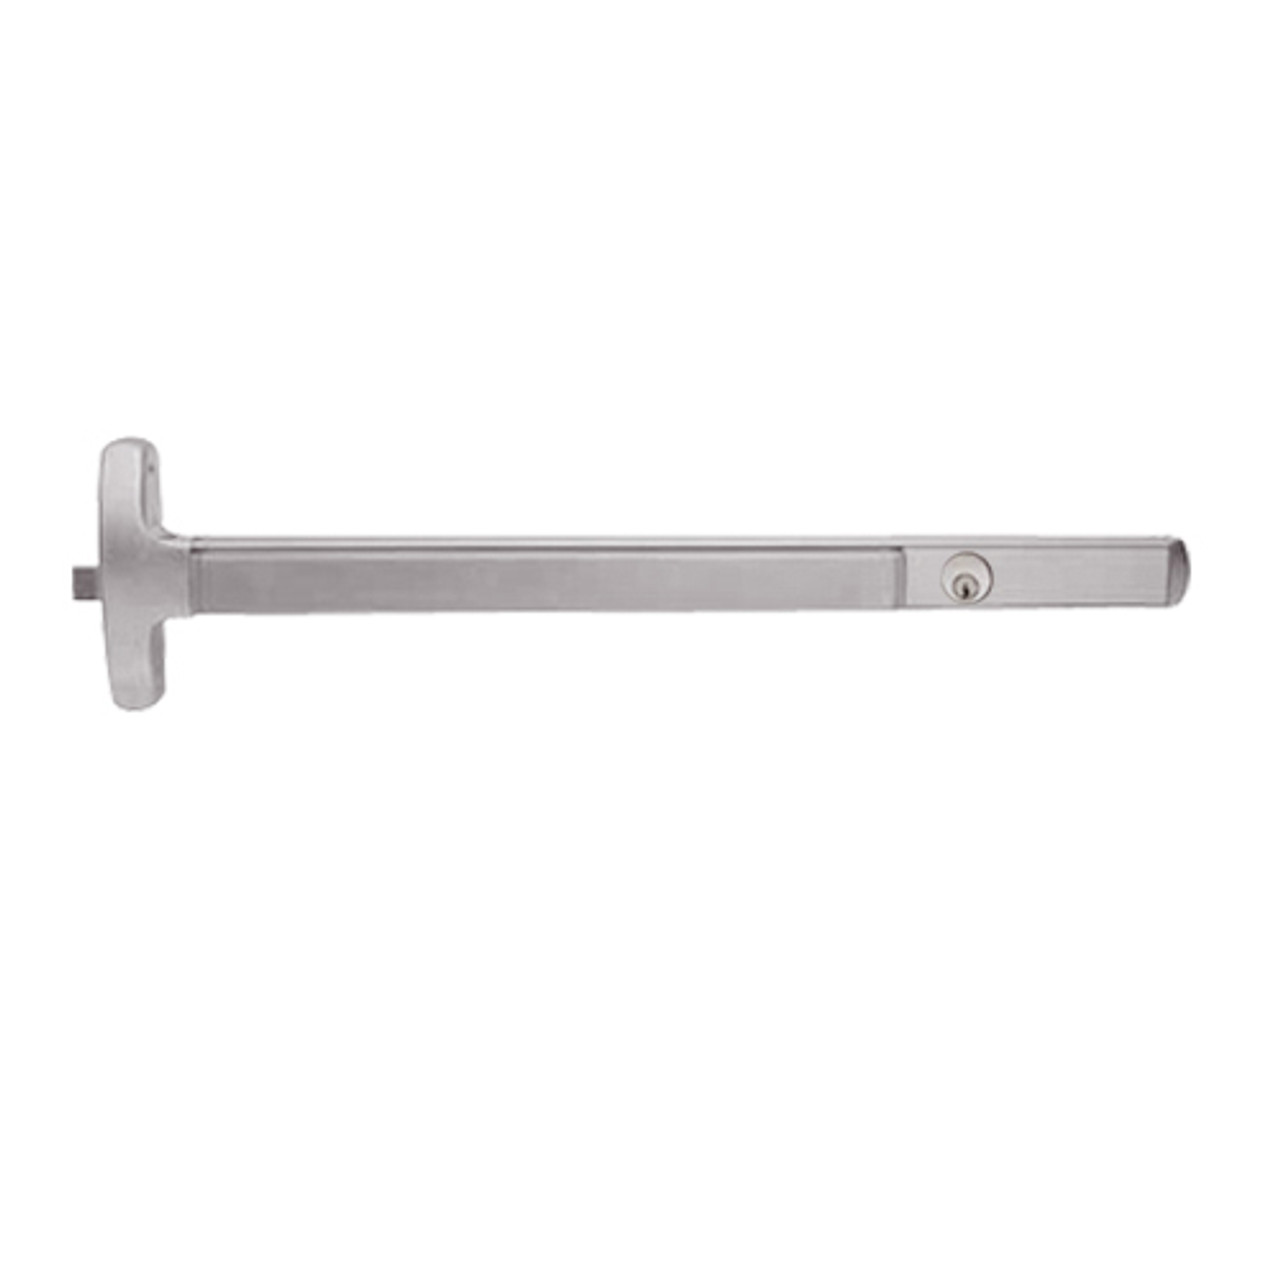 CD24-R-NL-OP-US28-4 Falcon Exit Device in Anodized Aluminum